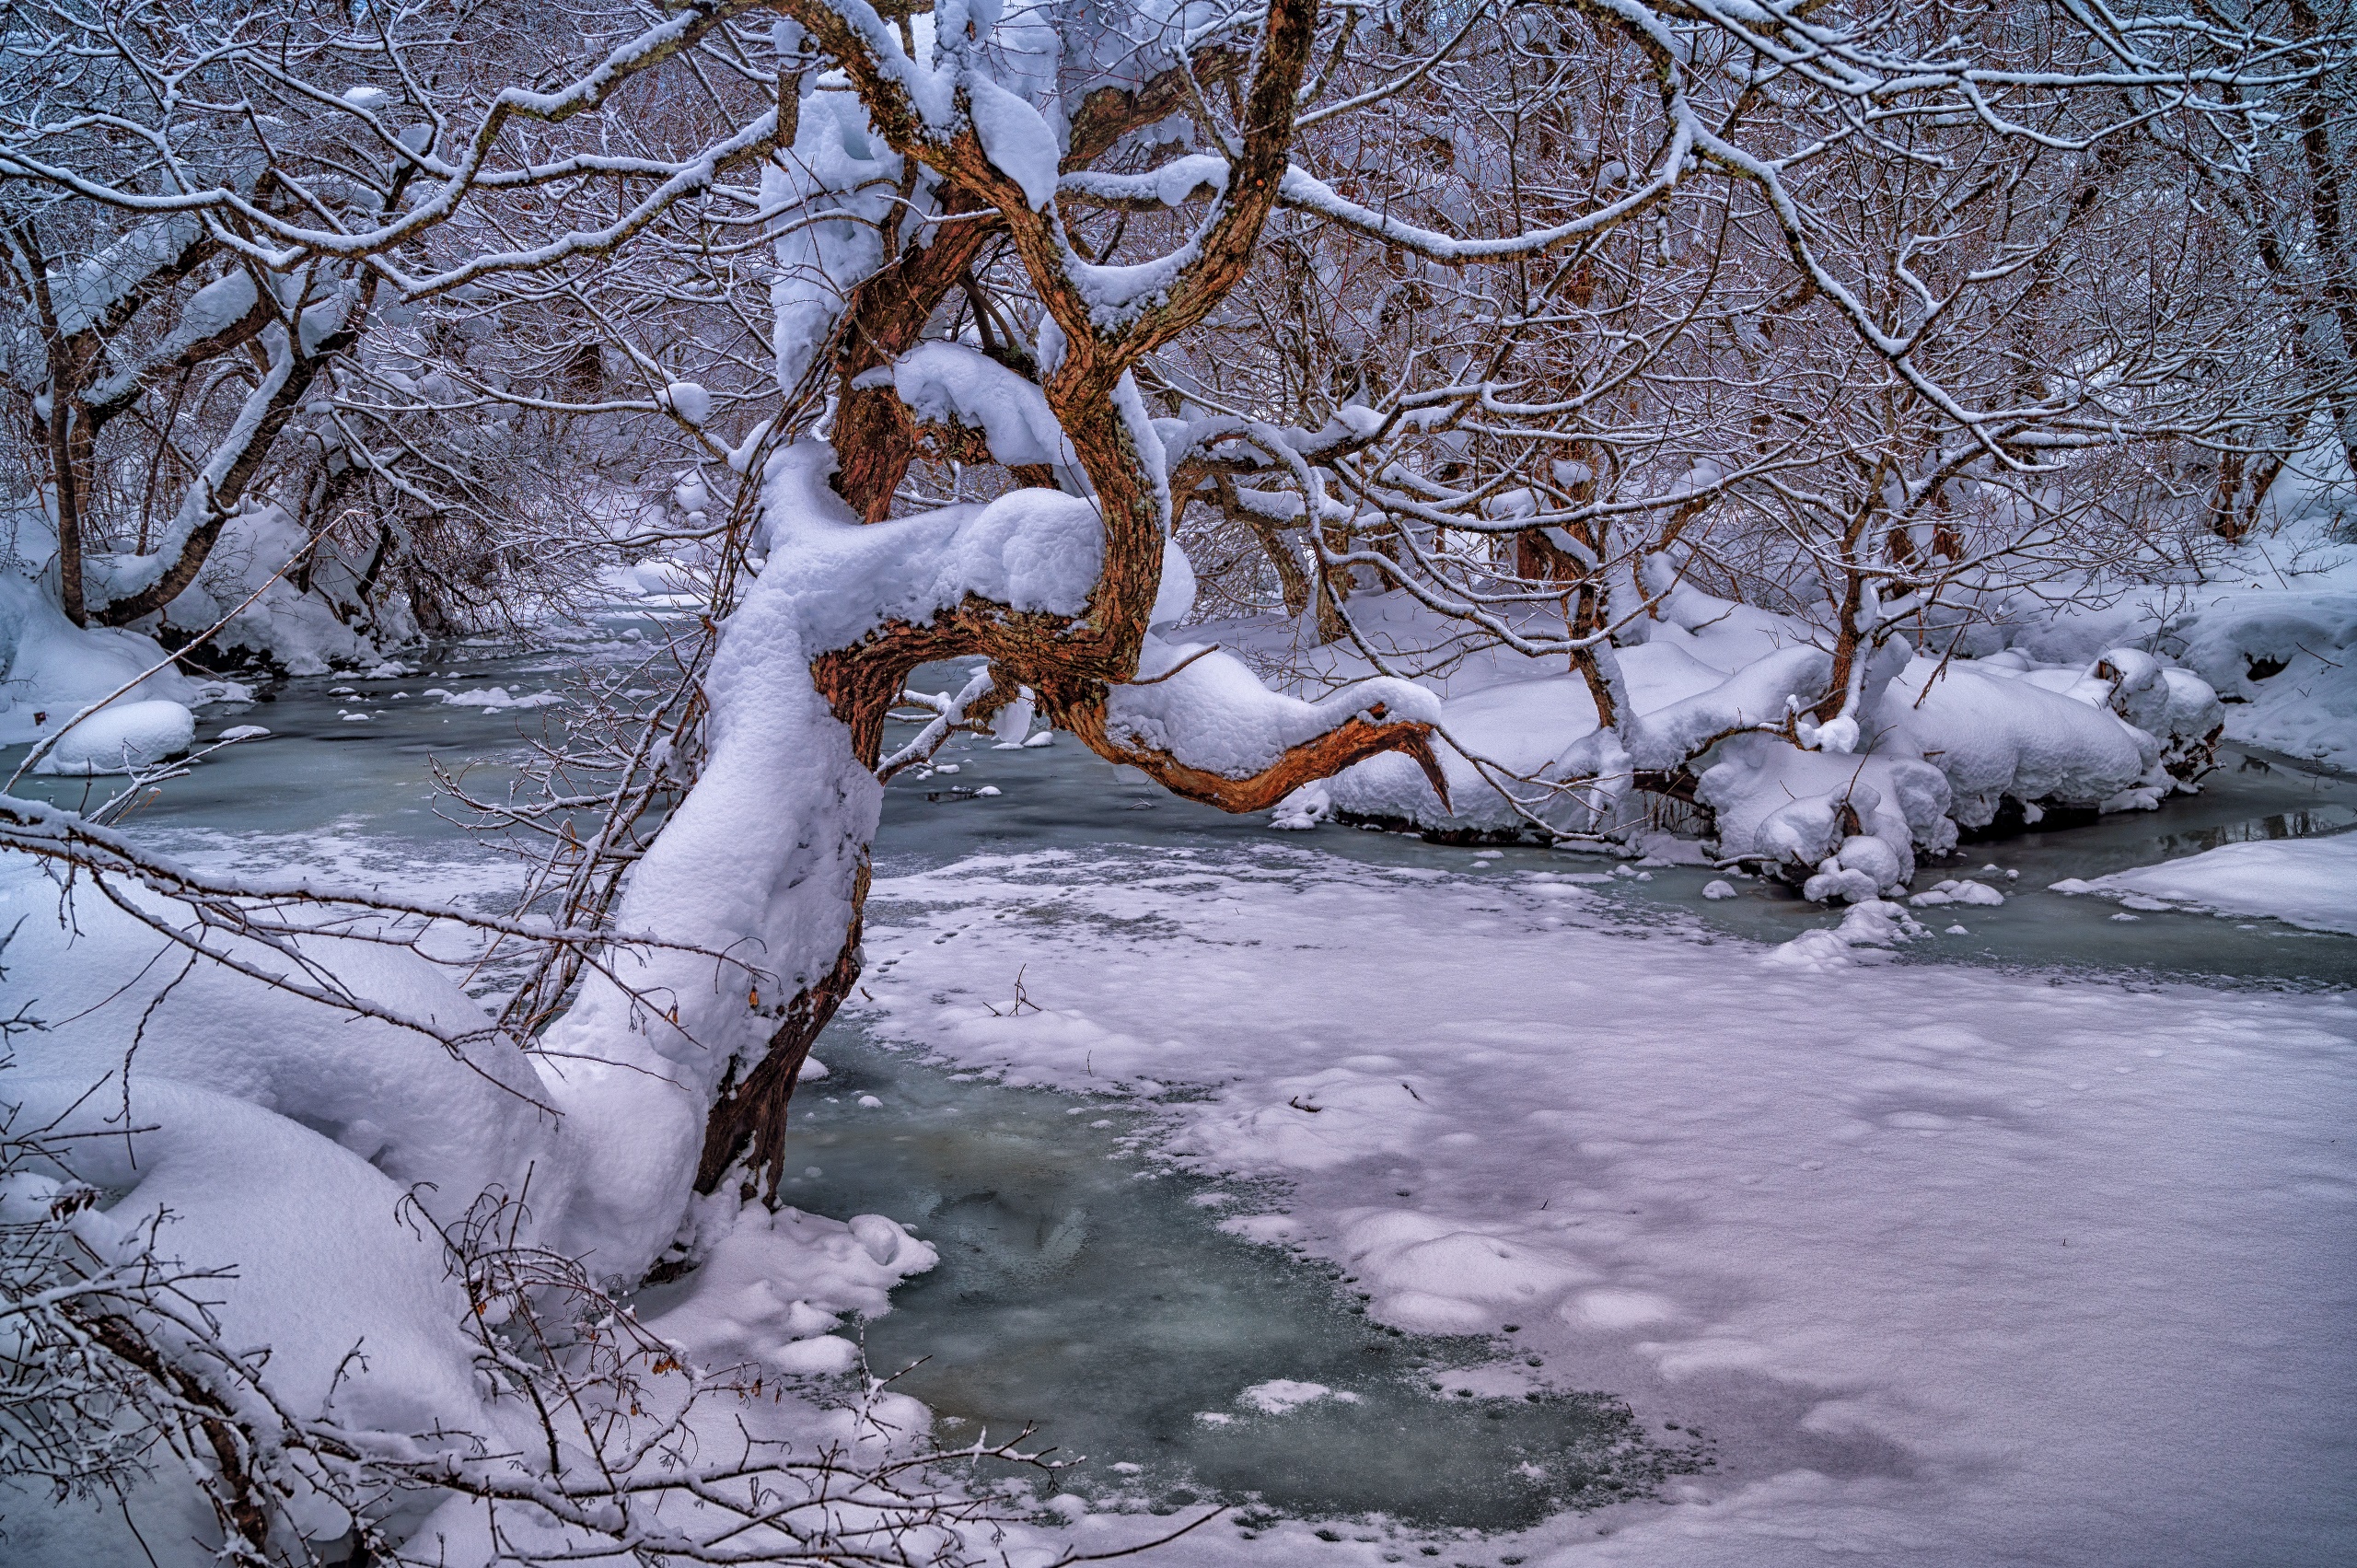 General 2560x1703 nature winter cold ice trees creeks outdoors snow